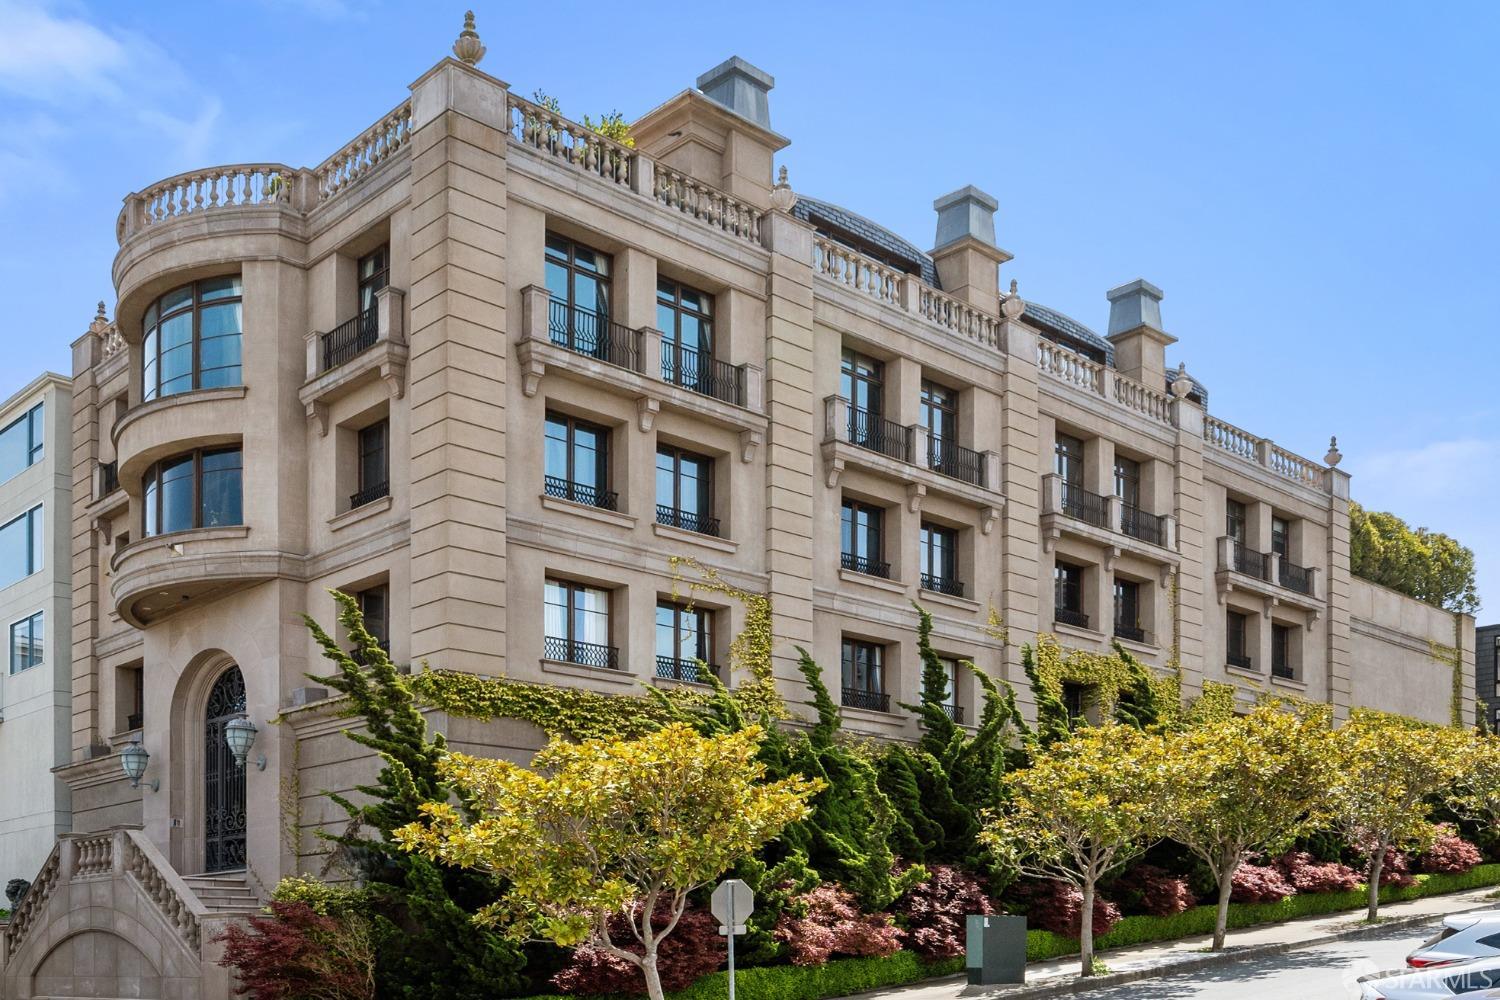 Live on the legendary Gold Coast of Pacific Heights in one of its most masterfully constructed and engineered bay view mansions, completed c. 2004. This much published, imposing corner residence is one of San Francisco's premier properties. It boasts panoramic views stretching from the Golden Gate Bridge to Marin, across the bay to Alcatraz, the East Bay, and beyond. Built with concrete and steel and showcasing stellar craftsmanship and luxe finishes, it features 7 bedrooms; 7 full baths; 2 half baths; a glamorous lacquered living/dining salon ideal for entertaining; a light-filled great room that encompasses the open, eat-in kitchen and family room; a spacious library; a sensational pub/billiards room; sun-drenched south lawn; and a stunning Golden Gate view roof terrace w/ tiled spa. The sophisticated smart home has an elevator, an elegant serpentine staircase, gym, wine cellar, high ceilings, walnut floors, 14 sets of mahogany French doors, 2 fireplaces, big laundry room w/ pet bath, radiant heating, abundant storage and large garage. Billionaire's Row is a serene enclave known for its majestic homes, notable residents and unrivaled views. This is a rare opportunity to own a custom-built residence in a world-class location with world-class views and exceptional outdoor space.